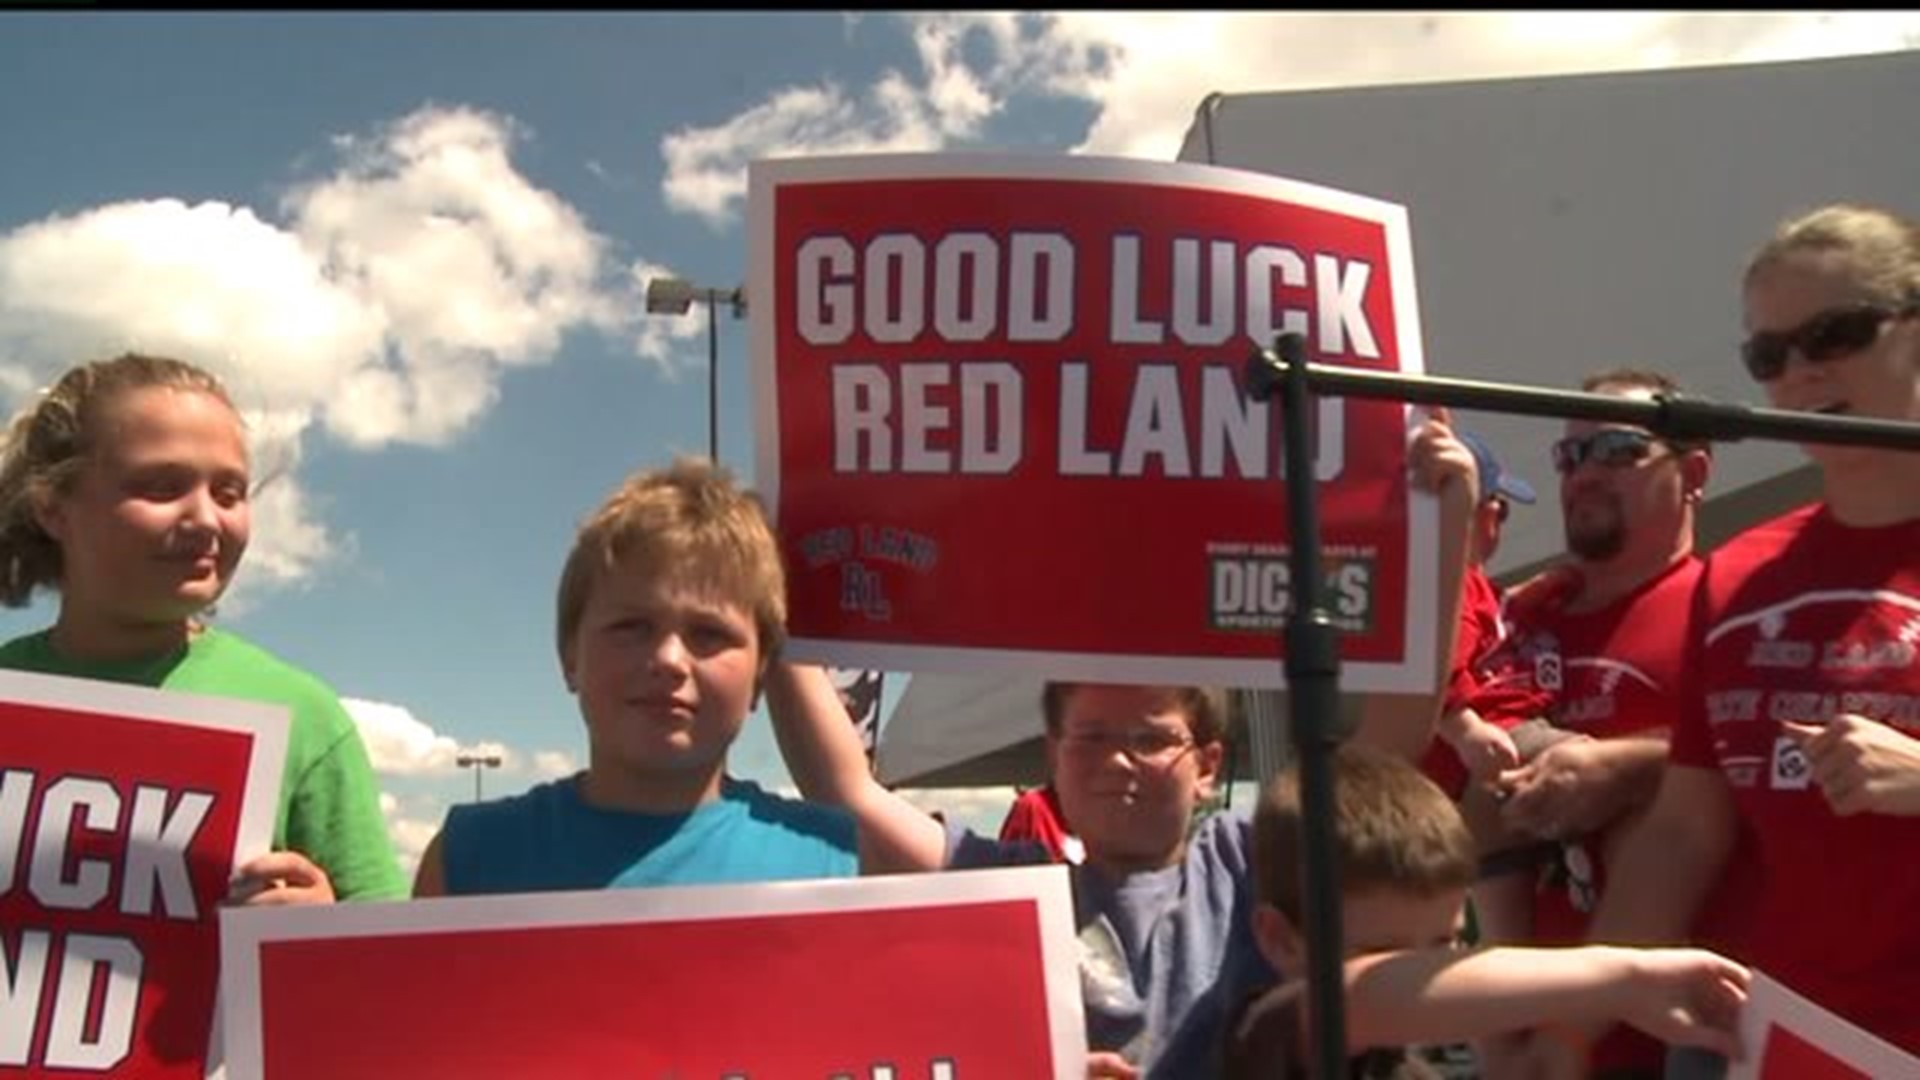 Pep rally held for Red Land little league team